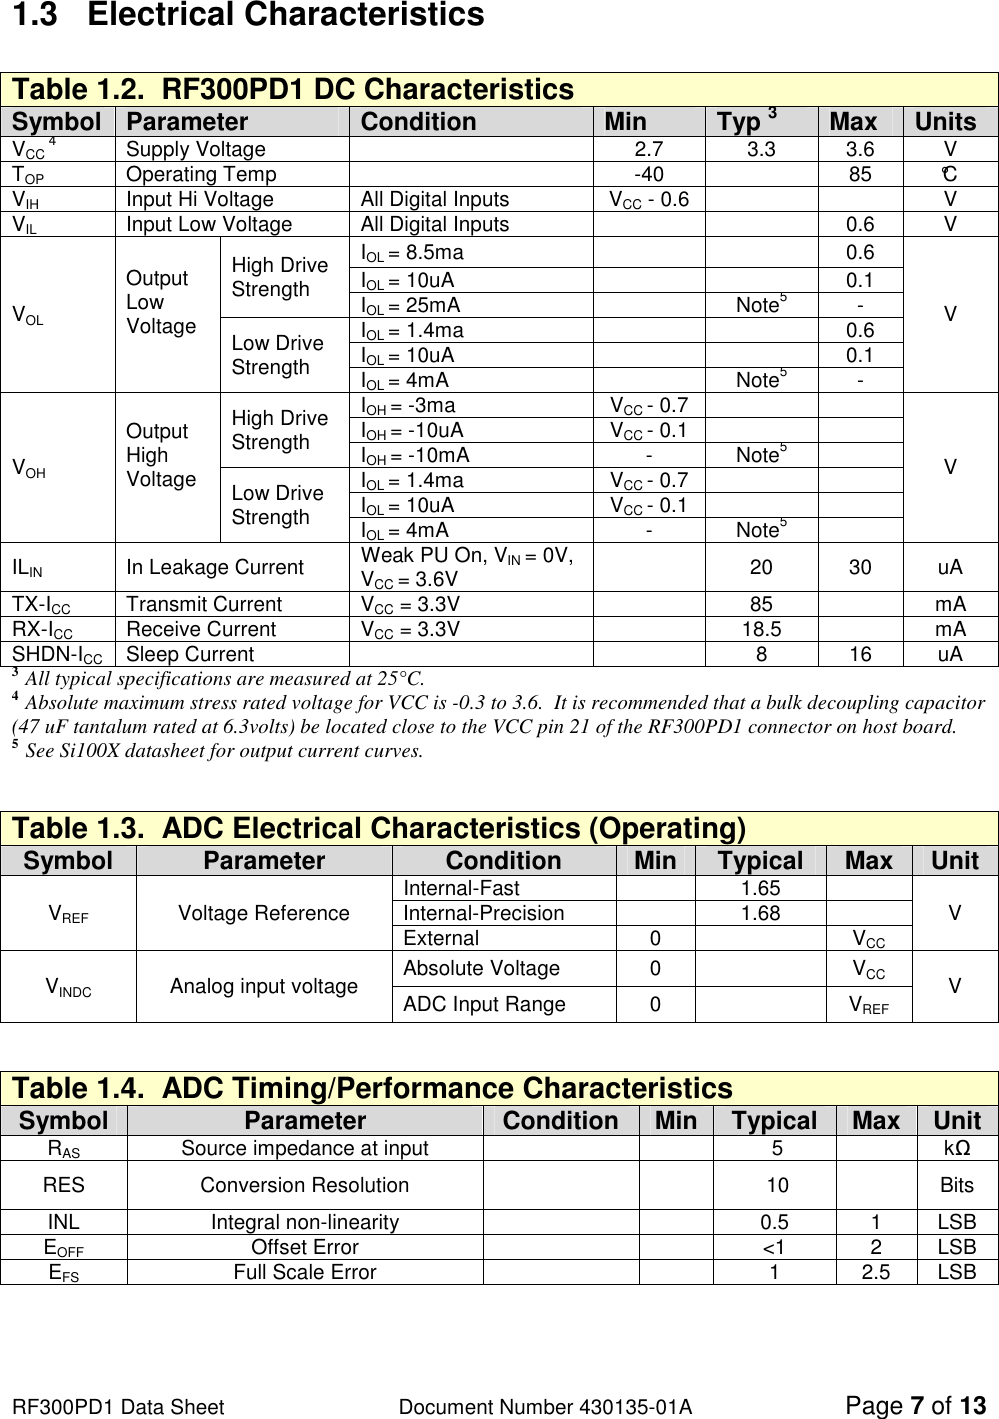                                                                                                                                                                          RF300PD1 Data Sheet                   Document Number 430135-01A Page 7 of 13 1.3  Electrical Characteristics  Table 1.2.  RF300PD1 DC Characteristics Symbol Parameter Condition Min Typ 3 Max Units VCC 4 Supply Voltage    2.7  3.3  3.6  V TOP  Operating Temp     -40    85  °C VIH  Input Hi Voltage  All Digital Inputs  VCC - 0.6      V VIL  Input Low Voltage  All Digital Inputs      0.6  V VOL Output Low Voltage  High Drive Strength IOL = 8.5ma    0.6 V IOL = 10uA    0.1 IOL = 25mA    Note5 - Low Drive Strength IOL = 1.4ma    0.6 IOL = 10uA    0.1 IOL = 4mA    Note5 - VOH Output High Voltage  High Drive Strength IOH = -3ma  VCC - 0.7     V IOH = -10uA  VCC - 0.1     IOH = -10mA  -  Note5   Low Drive Strength IOL = 1.4ma  VCC - 0.7     IOL = 10uA  VCC - 0.1     IOL = 4mA  -  Note5   ILIN  In Leakage Current  Weak PU On, VIN = 0V, VCC = 3.6V    20  30  uA TX-ICC   Transmit Current  VCC = 3.3V    85    mA RX-ICC   Receive Current  VCC = 3.3V    18.5    mA SHDN-ICC Sleep Current       8  16  uA 3  All typical specifications are measured at 25°C. 4  Absolute maximum stress rated voltage for VCC is -0.3 to 3.6.  It is recommended that a bulk decoupling capacitor (47 uF tantalum rated at 6.3volts) be located close to the VCC pin 21 of the RF300PD1 connector on host board. 5  See Si100X datasheet for output current curves.   Table 1.3.  ADC Electrical Characteristics (Operating) Symbol Parameter Condition Min Typical Max Unit VREF Voltage Reference  Internal-Fast    1.65    V Internal-Precision    1.68   External  0    VCC VINDC  Analog input voltage  Absolute Voltage  0    VCC V ADC Input Range  0    VREF   Table 1.4.  ADC Timing/Performance Characteristics Symbol Parameter Condition Min Typical Max Unit RAS  Source impedance at input        5    kΩ RES  Conversion Resolution       10    Bits INL  Integral non-linearity       0.5  1  LSB EOFF  Offset Error        &lt;1  2  LSB EFS  Full Scale Error        1  2.5  LSB     